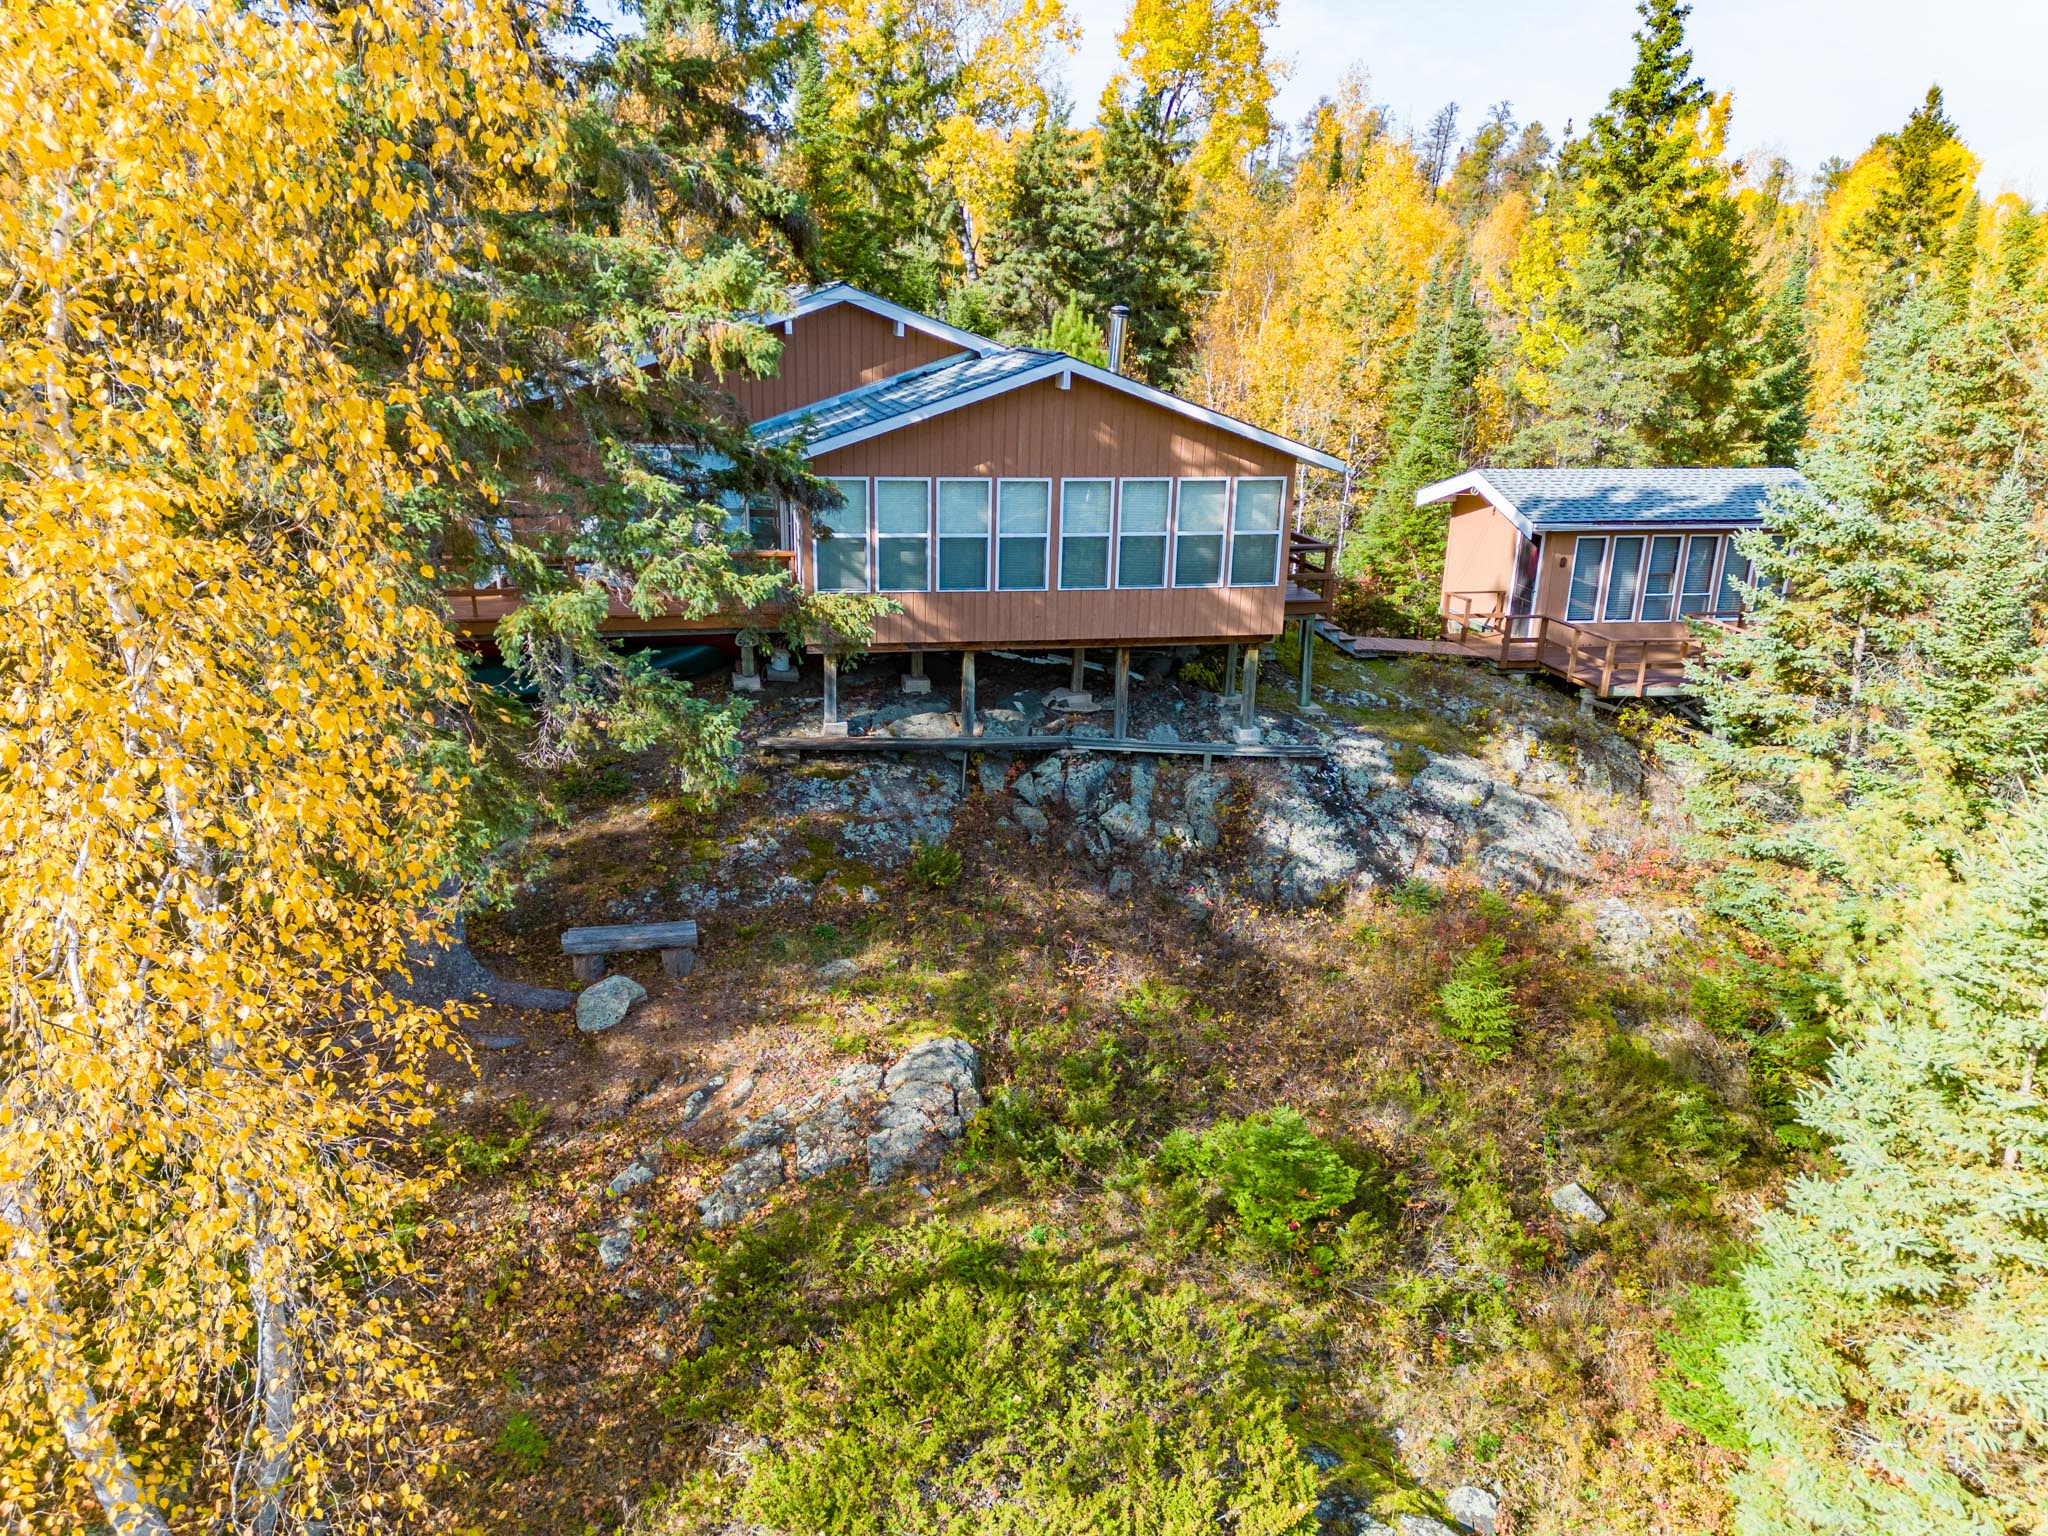 A lakefront cottage with lots of windows sits on a high slope, surrounded by trees.